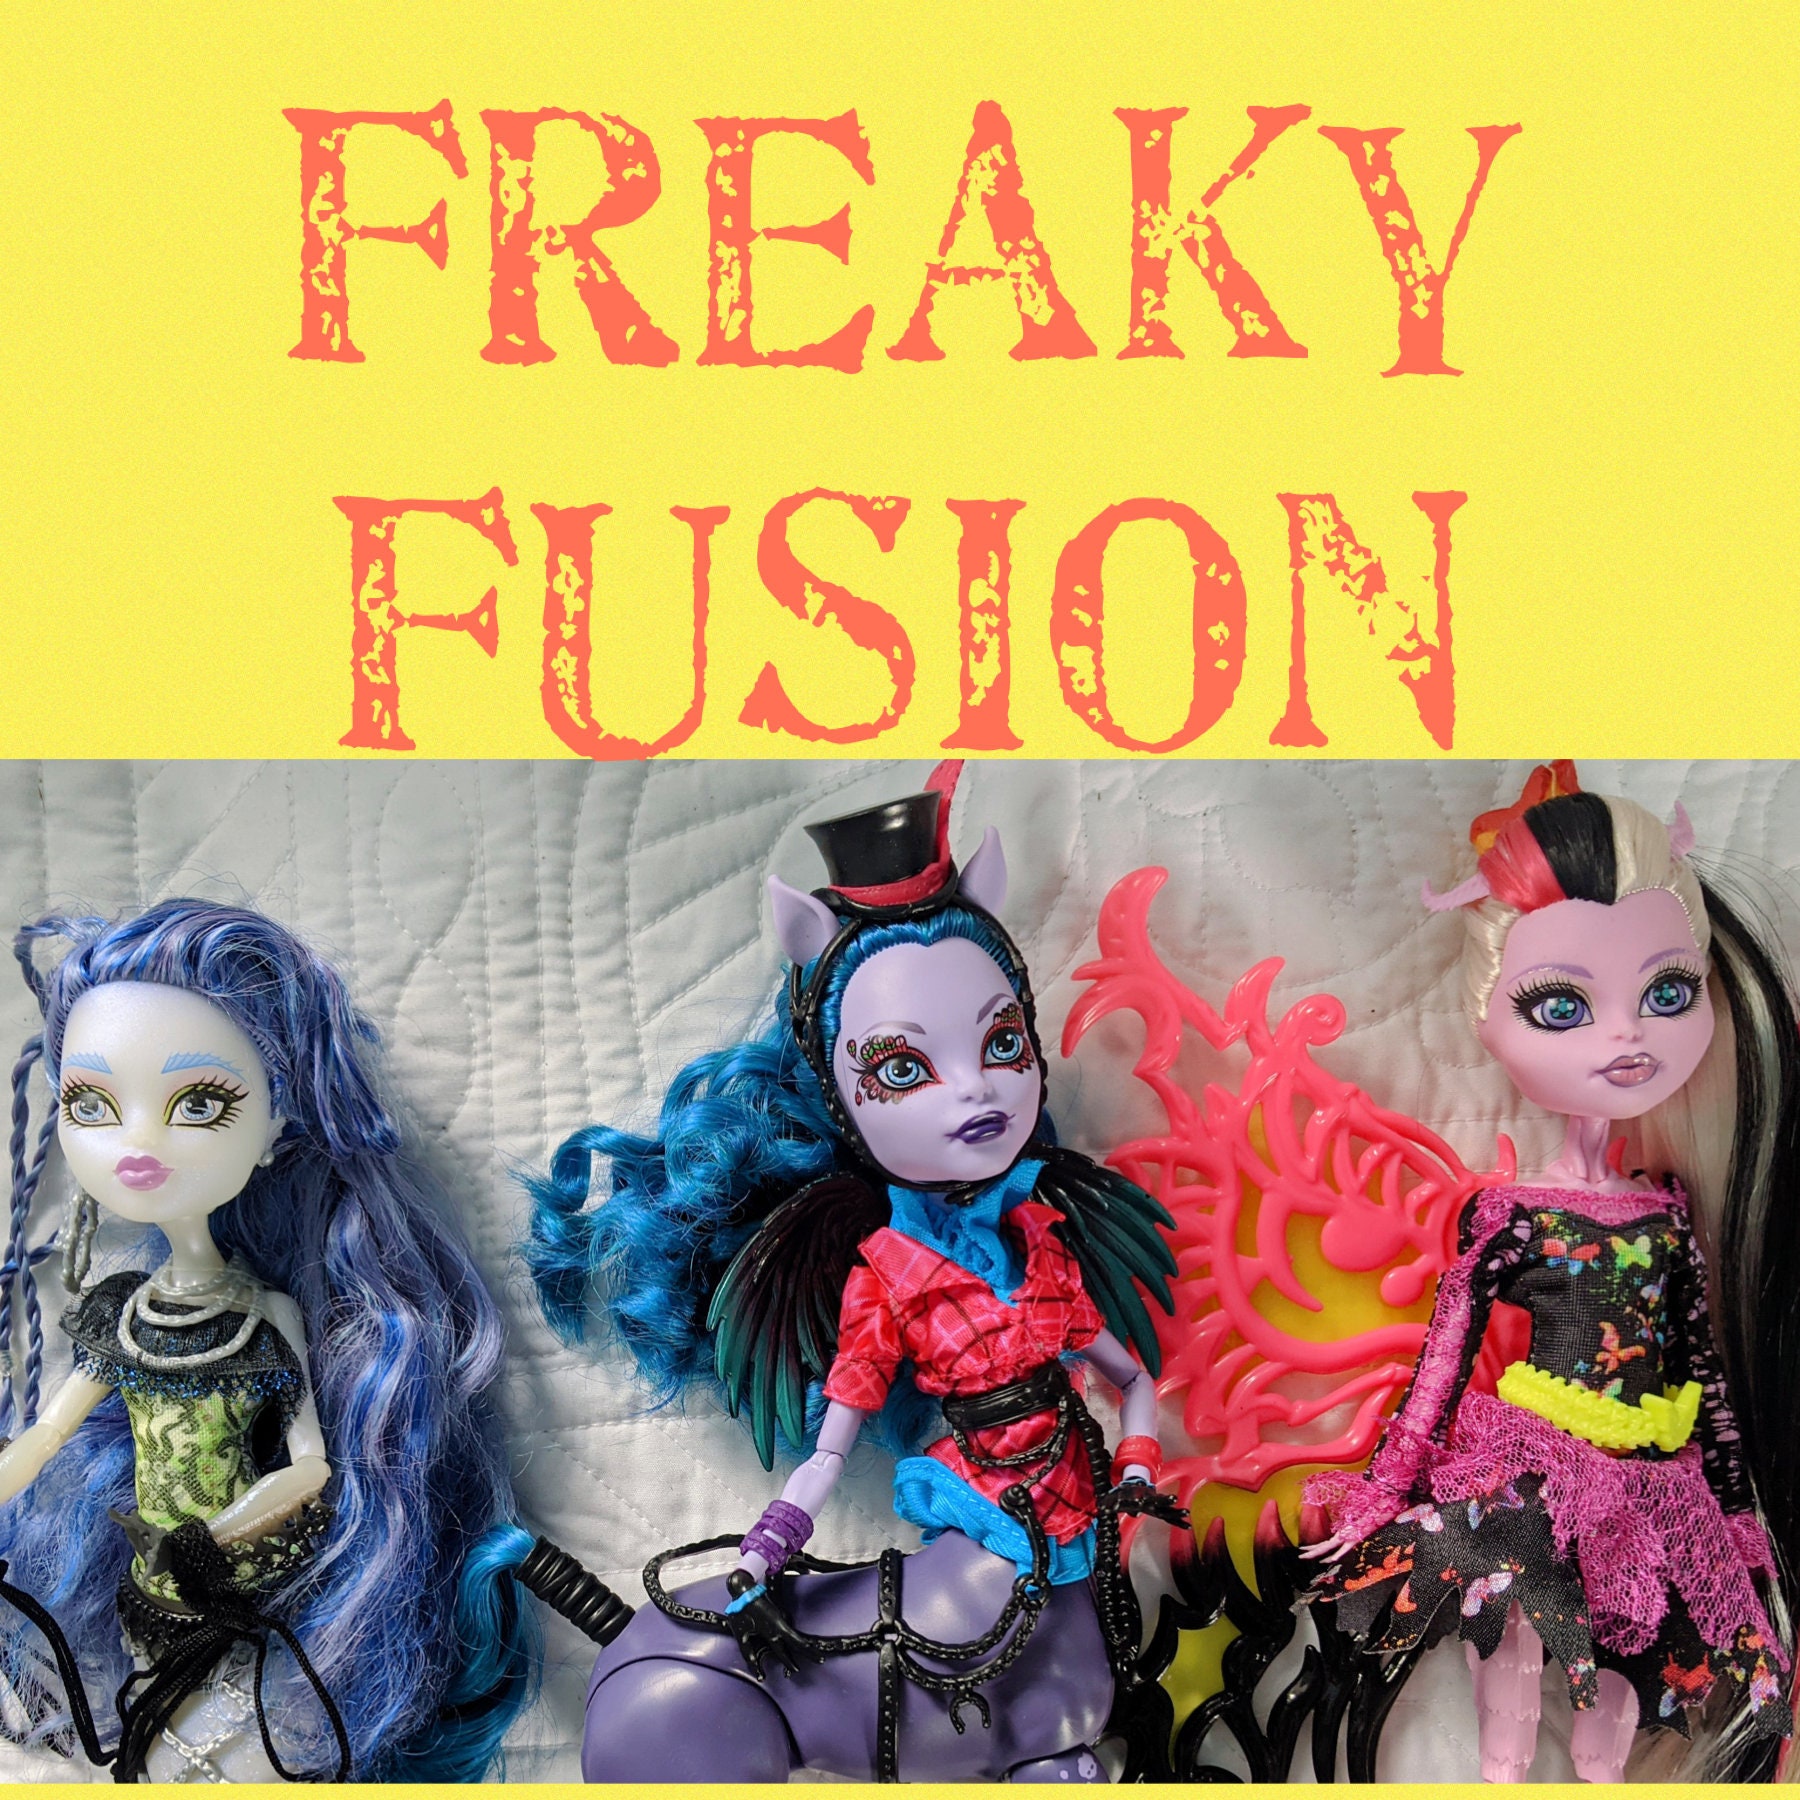 Freaky-Flawless — First look at Monster High G1 reproductions of